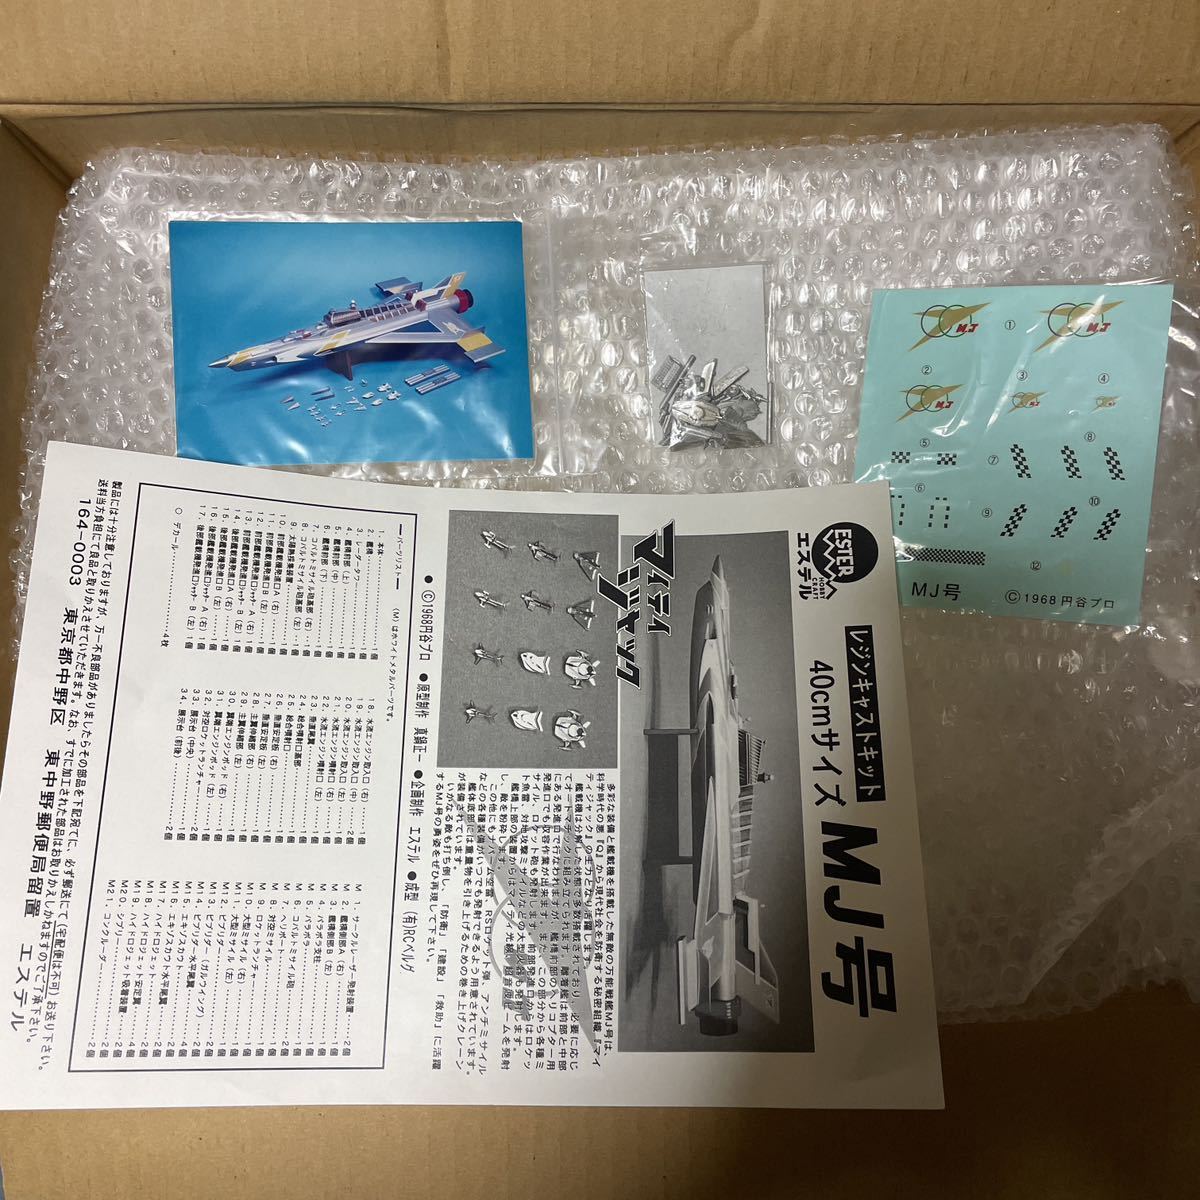  mighty Jack MJ number garage kit Ester limitation 80 set resin made all-purpose battleship mighty number not yet constructed 